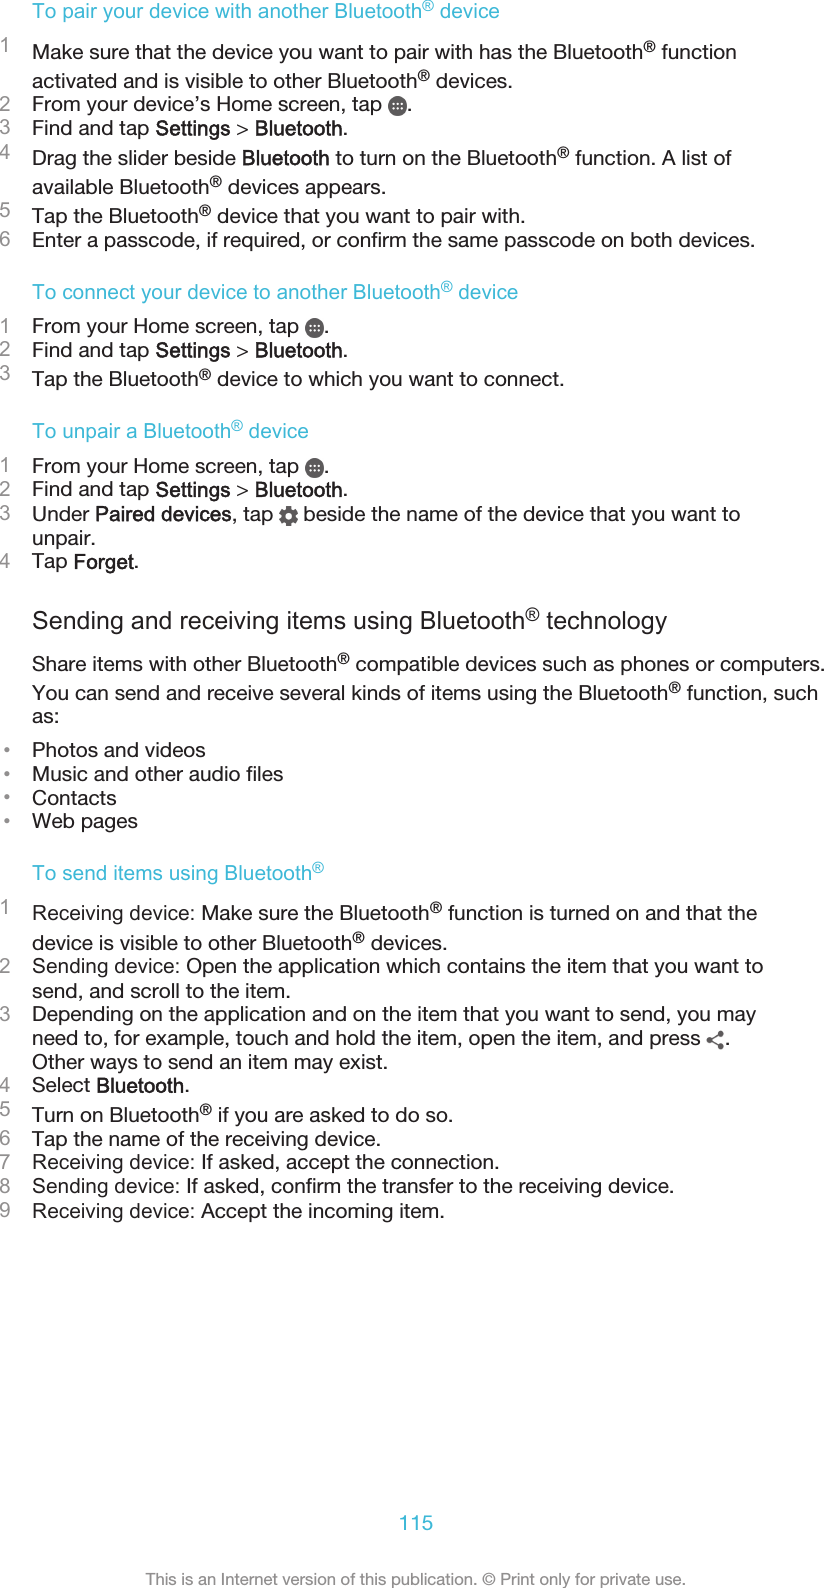 To pair your device with another Bluetooth® device1Make sure that the device you want to pair with has the Bluetooth® functionactivated and is visible to other Bluetooth® devices.2From your device’s Home screen, tap  .3Find and tap Settings &gt; Bluetooth.4Drag the slider beside Bluetooth to turn on the Bluetooth® function. A list ofavailable Bluetooth® devices appears.5Tap the Bluetooth® device that you want to pair with.6Enter a passcode, if required, or confirm the same passcode on both devices.To connect your device to another Bluetooth® device1From your Home screen, tap  .2Find and tap Settings &gt; Bluetooth.3Tap the Bluetooth® device to which you want to connect.To unpair a Bluetooth® device1From your Home screen, tap  .2Find and tap Settings &gt; Bluetooth.3Under Paired devices, tap   beside the name of the device that you want tounpair.4Tap Forget.Sending and receiving items using Bluetooth® technologyShare items with other Bluetooth® compatible devices such as phones or computers.You can send and receive several kinds of items using the Bluetooth® function, suchas:•Photos and videos•Music and other audio files•Contacts•Web pagesTo send items using Bluetooth®1Receiving device: Make sure the Bluetooth® function is turned on and that thedevice is visible to other Bluetooth® devices.2Sending device: Open the application which contains the item that you want tosend, and scroll to the item.3Depending on the application and on the item that you want to send, you mayneed to, for example, touch and hold the item, open the item, and press  .Other ways to send an item may exist.4Select Bluetooth.5Turn on Bluetooth® if you are asked to do so.6Tap the name of the receiving device.7Receiving device: If asked, accept the connection.8Sending device: If asked, confirm the transfer to the receiving device.9Receiving device: Accept the incoming item.115This is an Internet version of this publication. © Print only for private use.